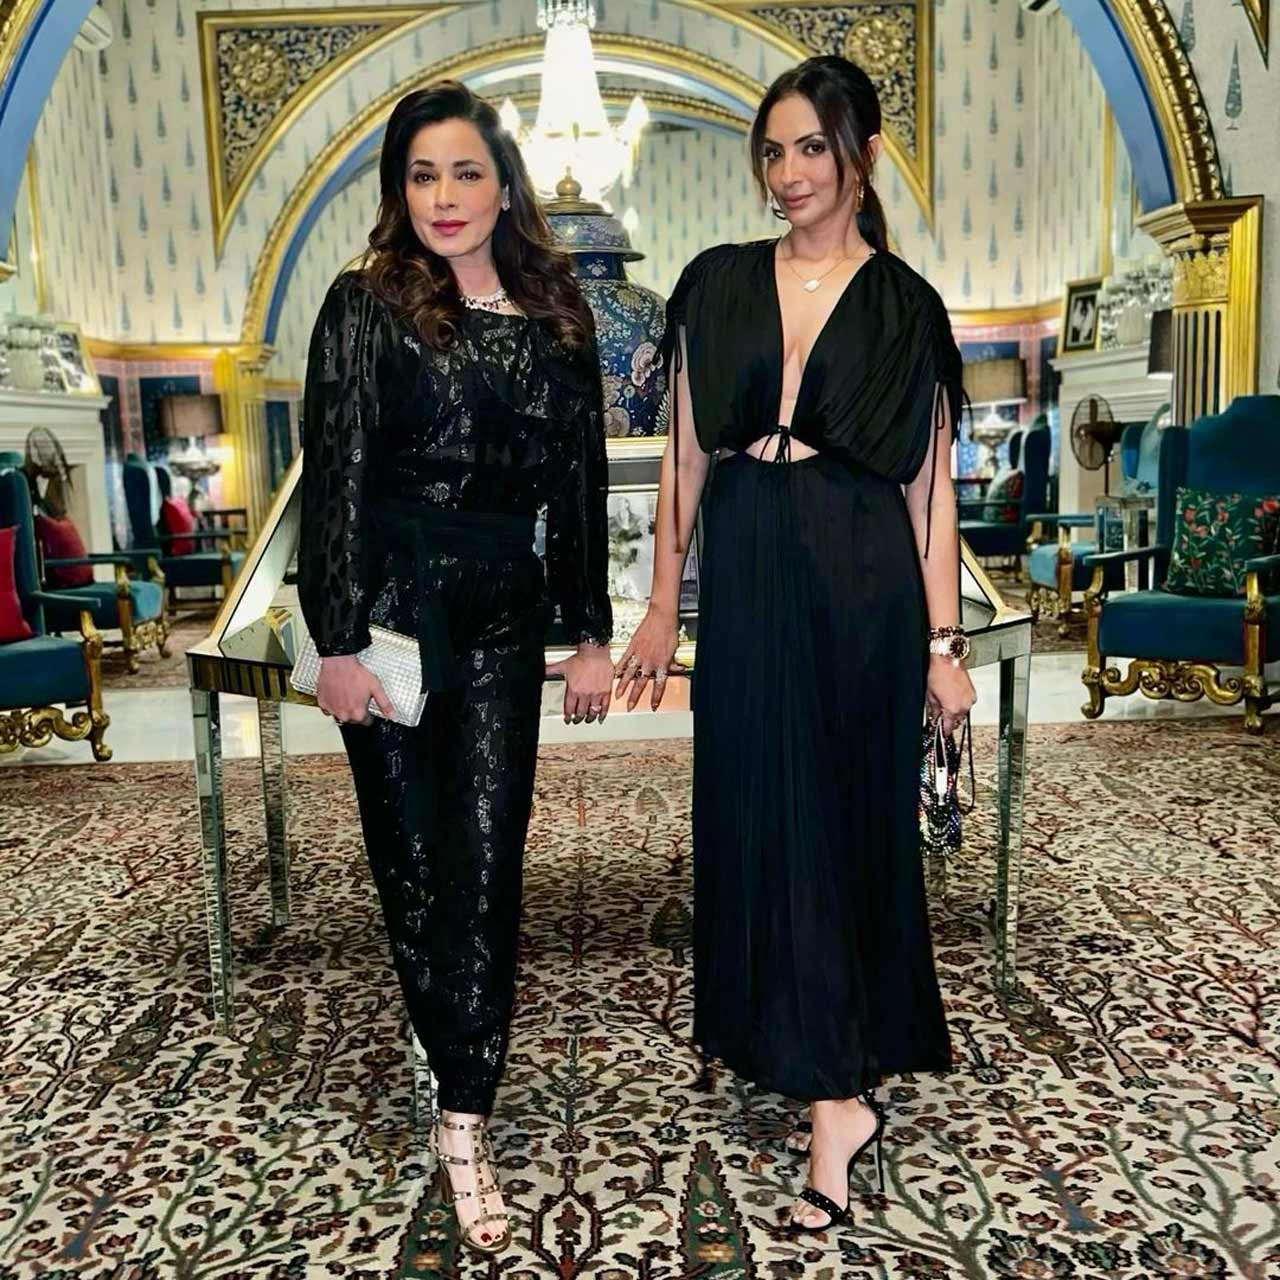 The gorgeous Bollywood wives from the hit reality series 'The Fabulous House Wives of Bollywood', Neelam Kothari, Bhavana Pandey and Seema Kiran Sajdeh, left the town talking with the glamourous appearance on Netflix